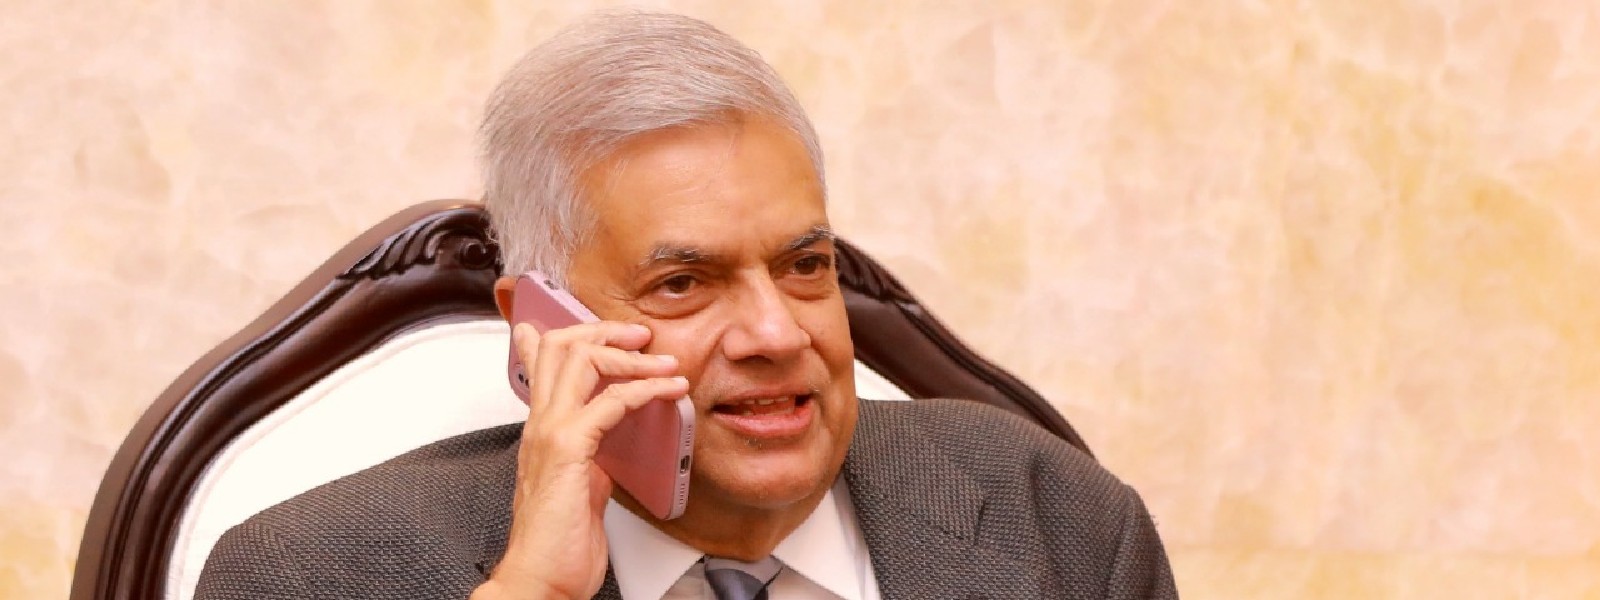 Ranil takes oaths as Acting President